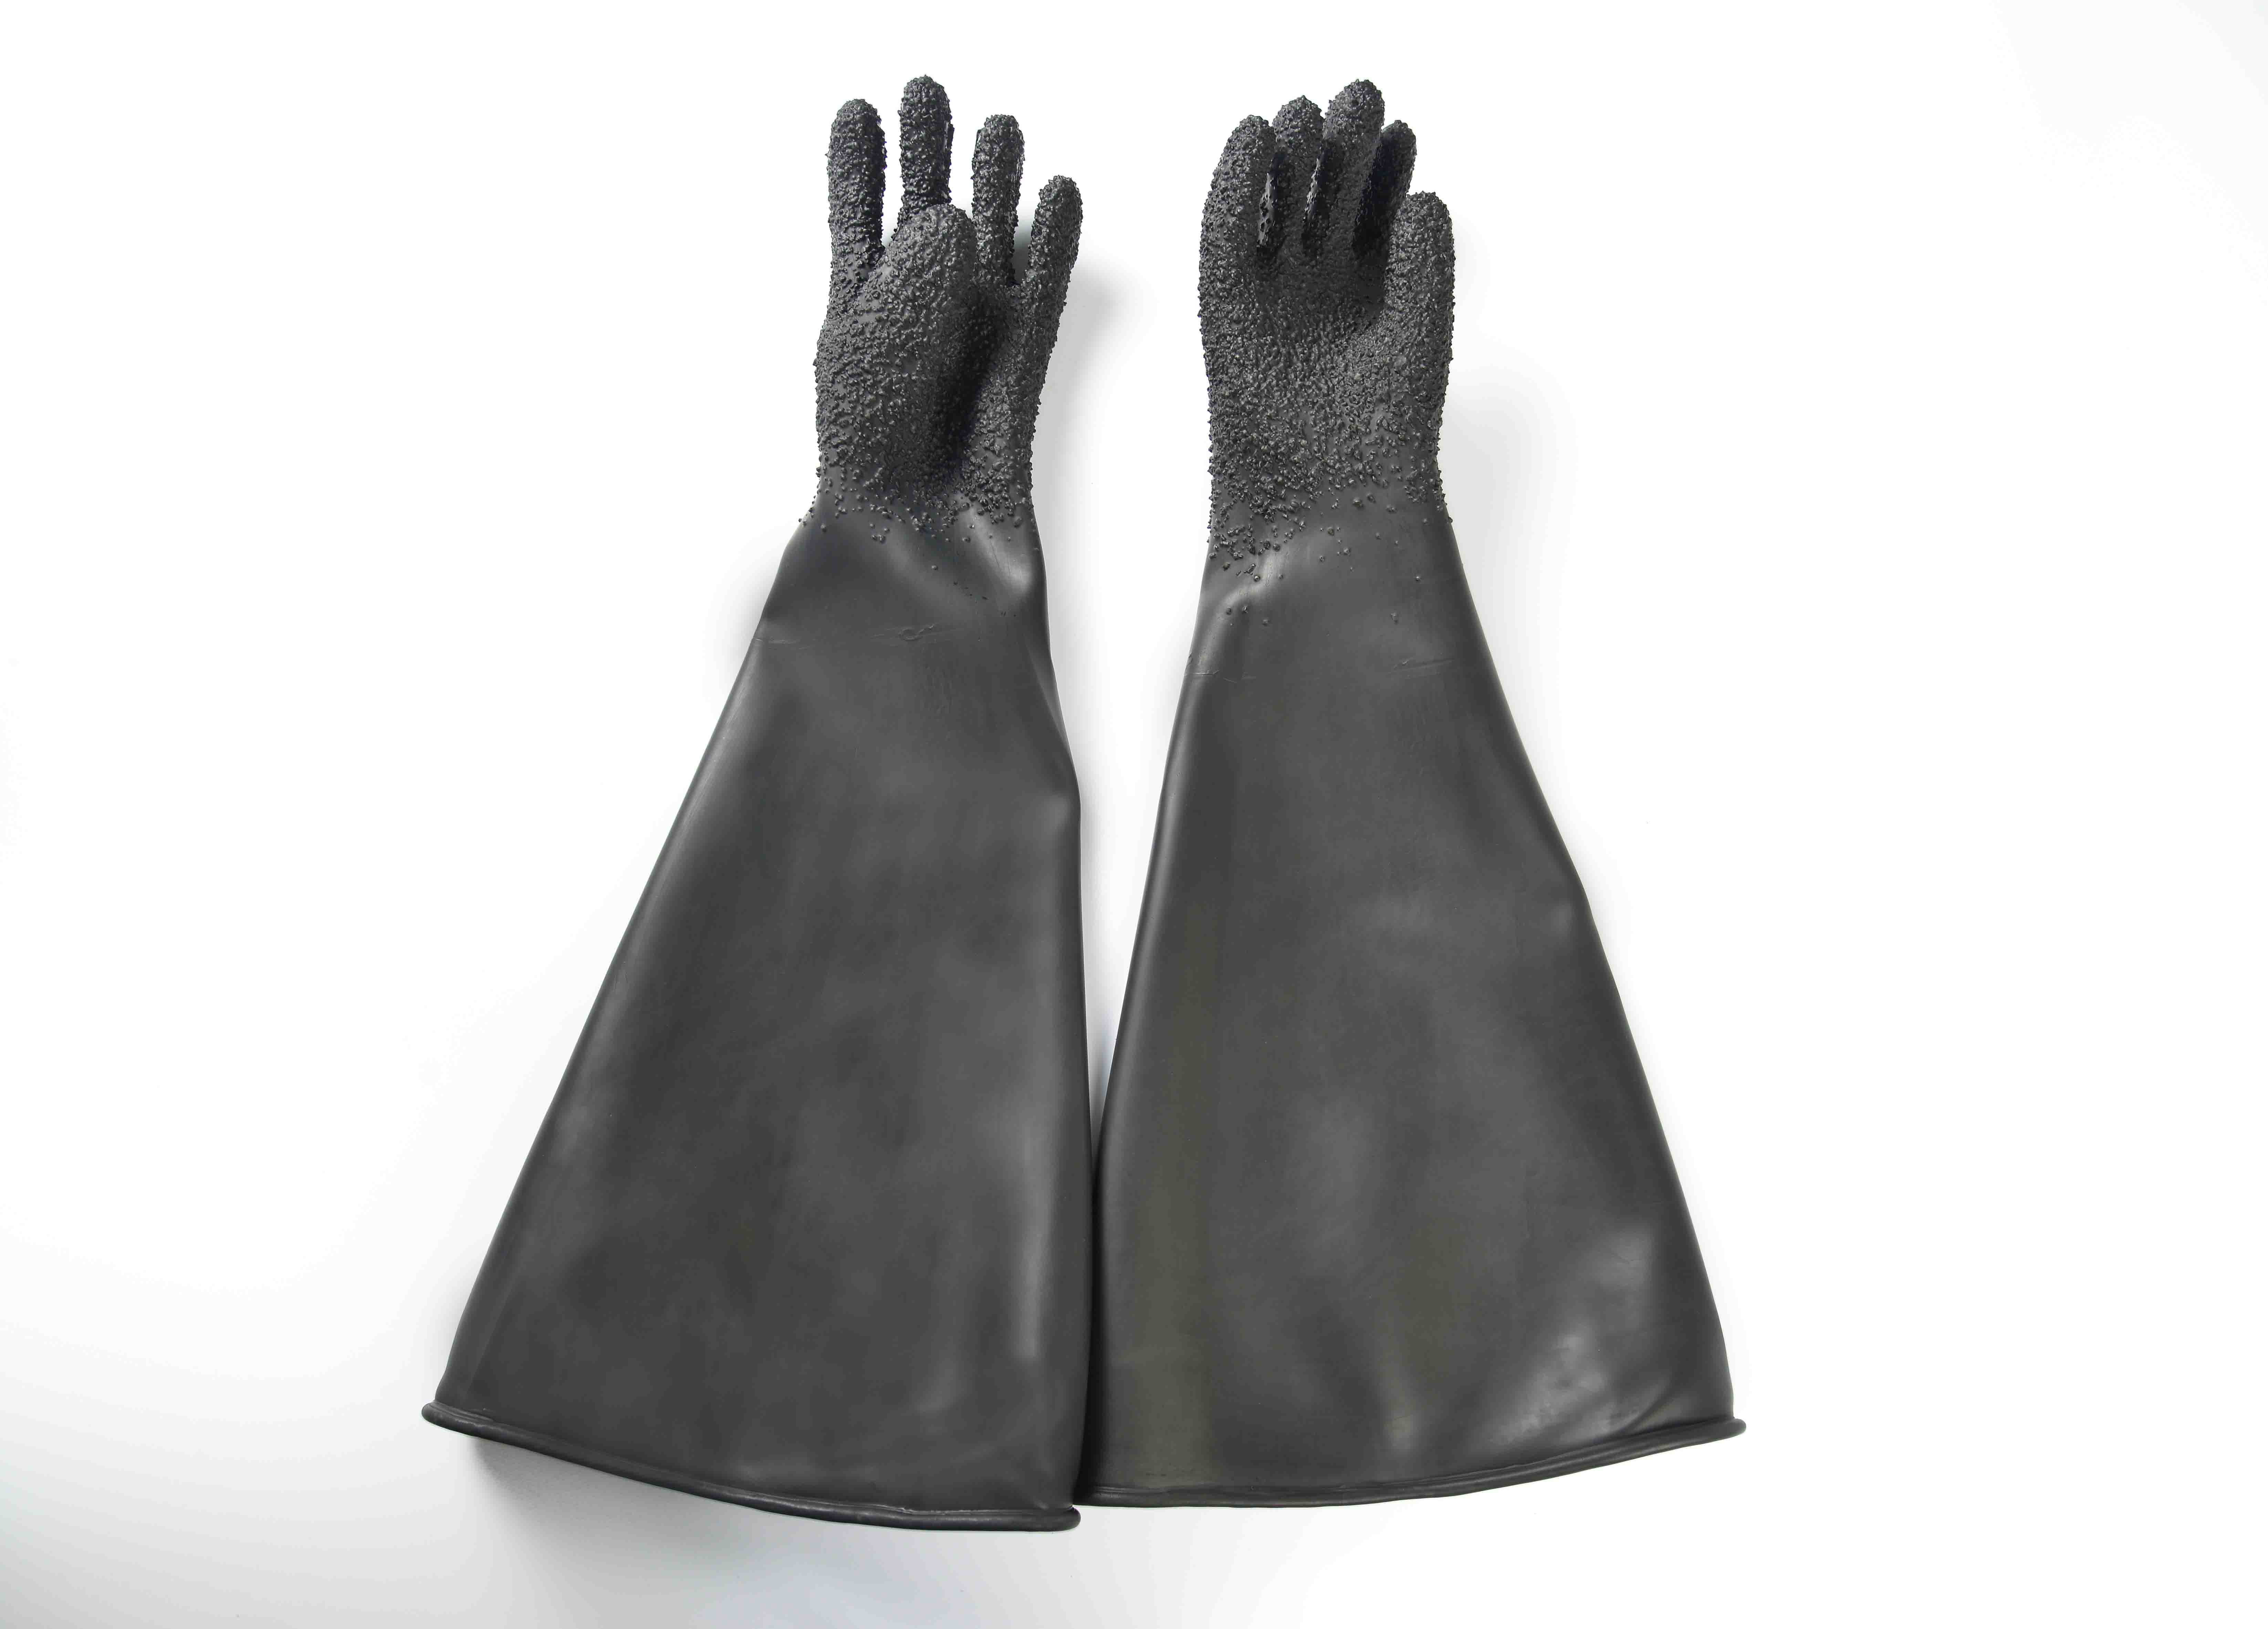 Hot new products 26″ Industrial rubber glove-Granule finish Johannesburg Factory